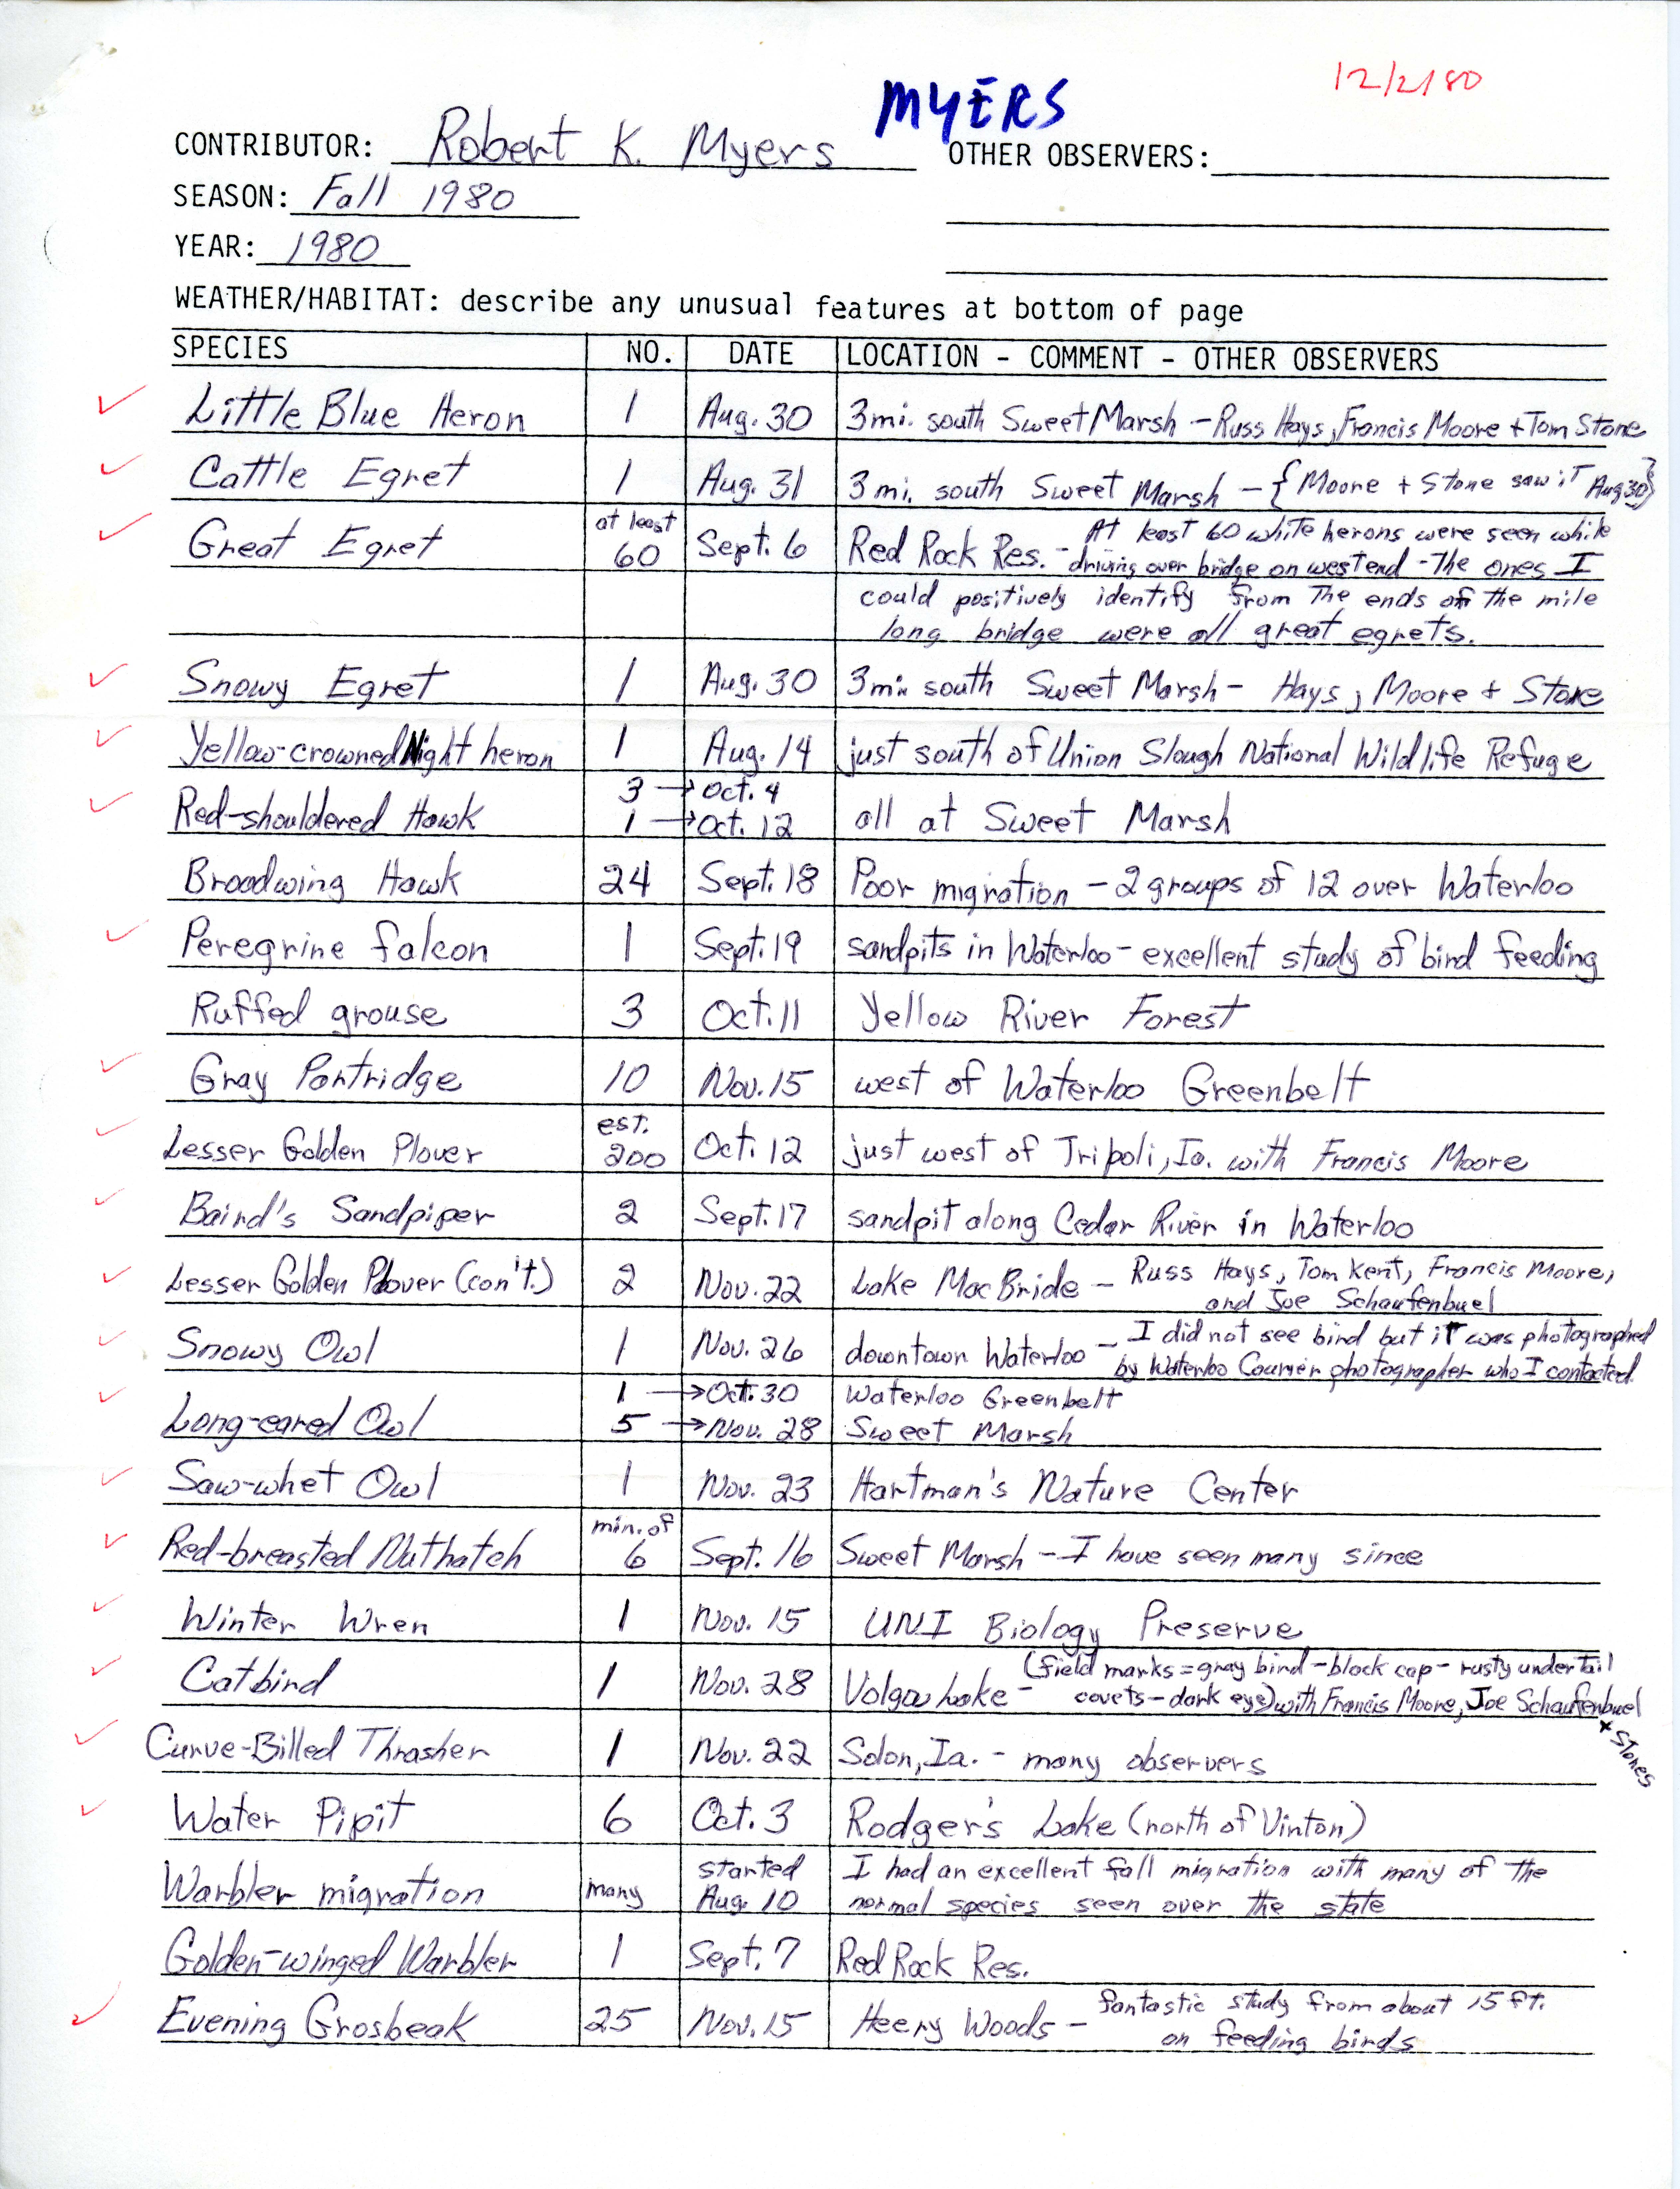 Annotated bird sighting list for Fall 1980 submitted by Robert K. Myers